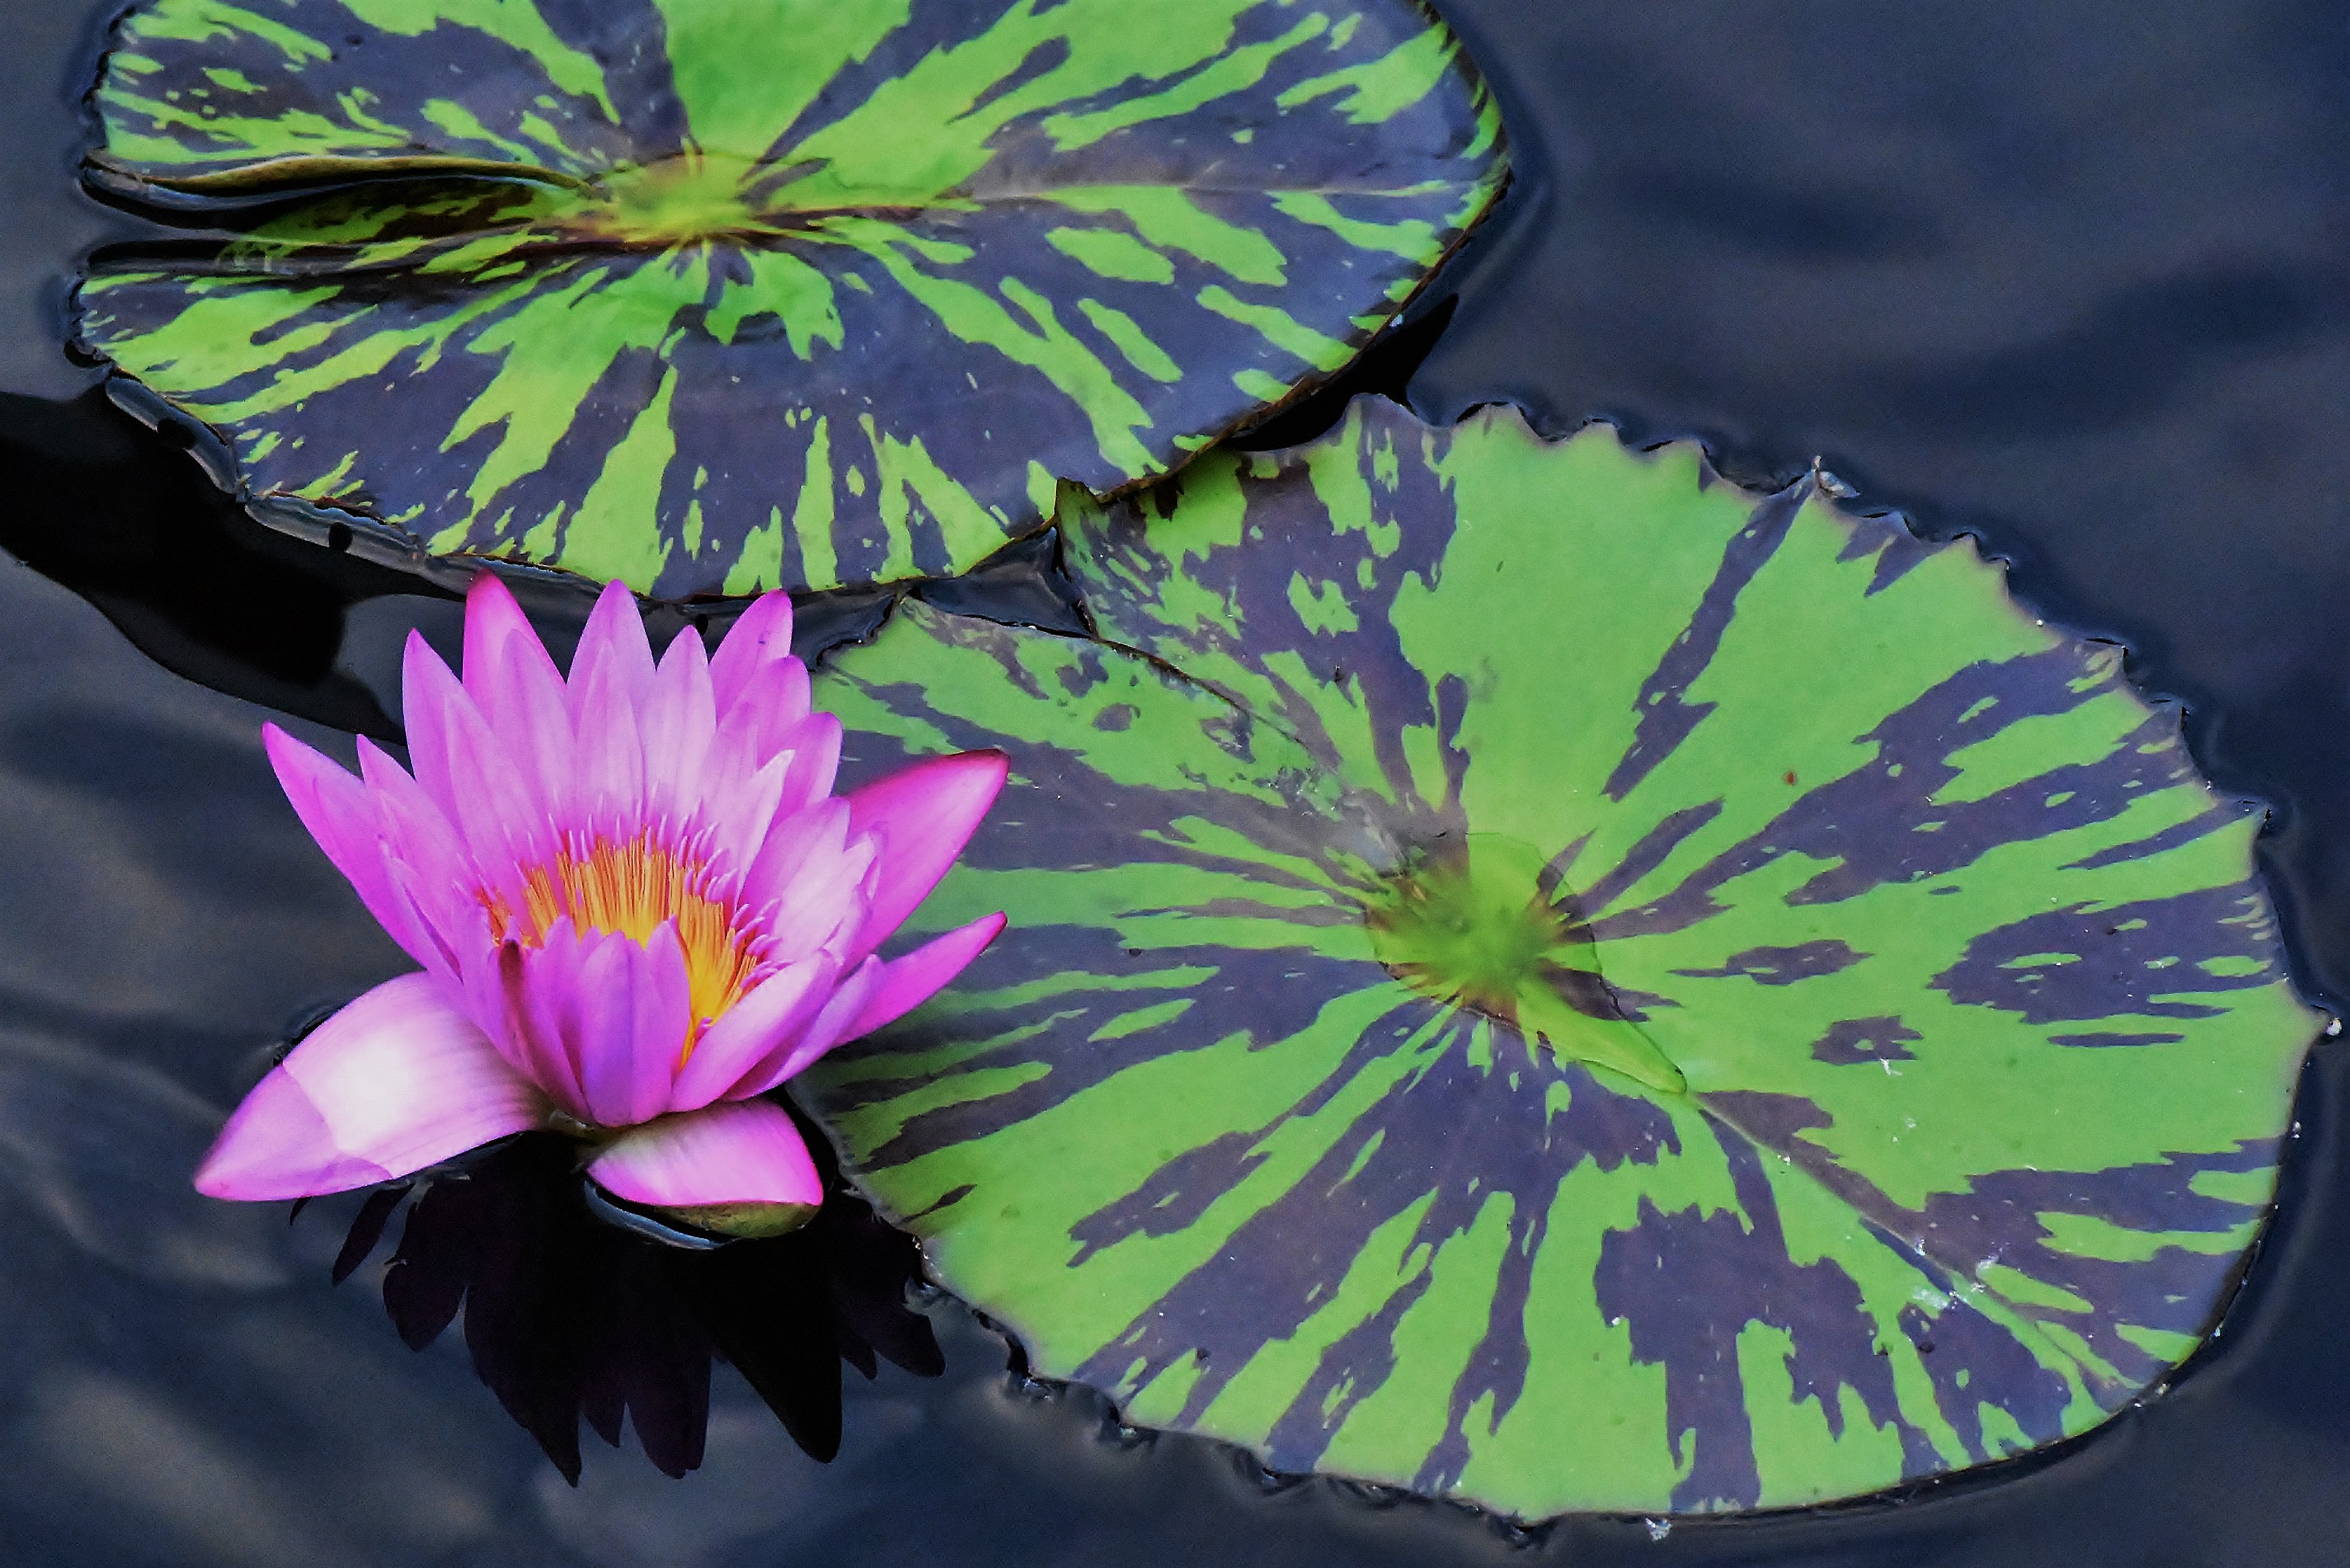 Earth Flower Lily Pad Pink Flower Pond Water Lily 4000x2669